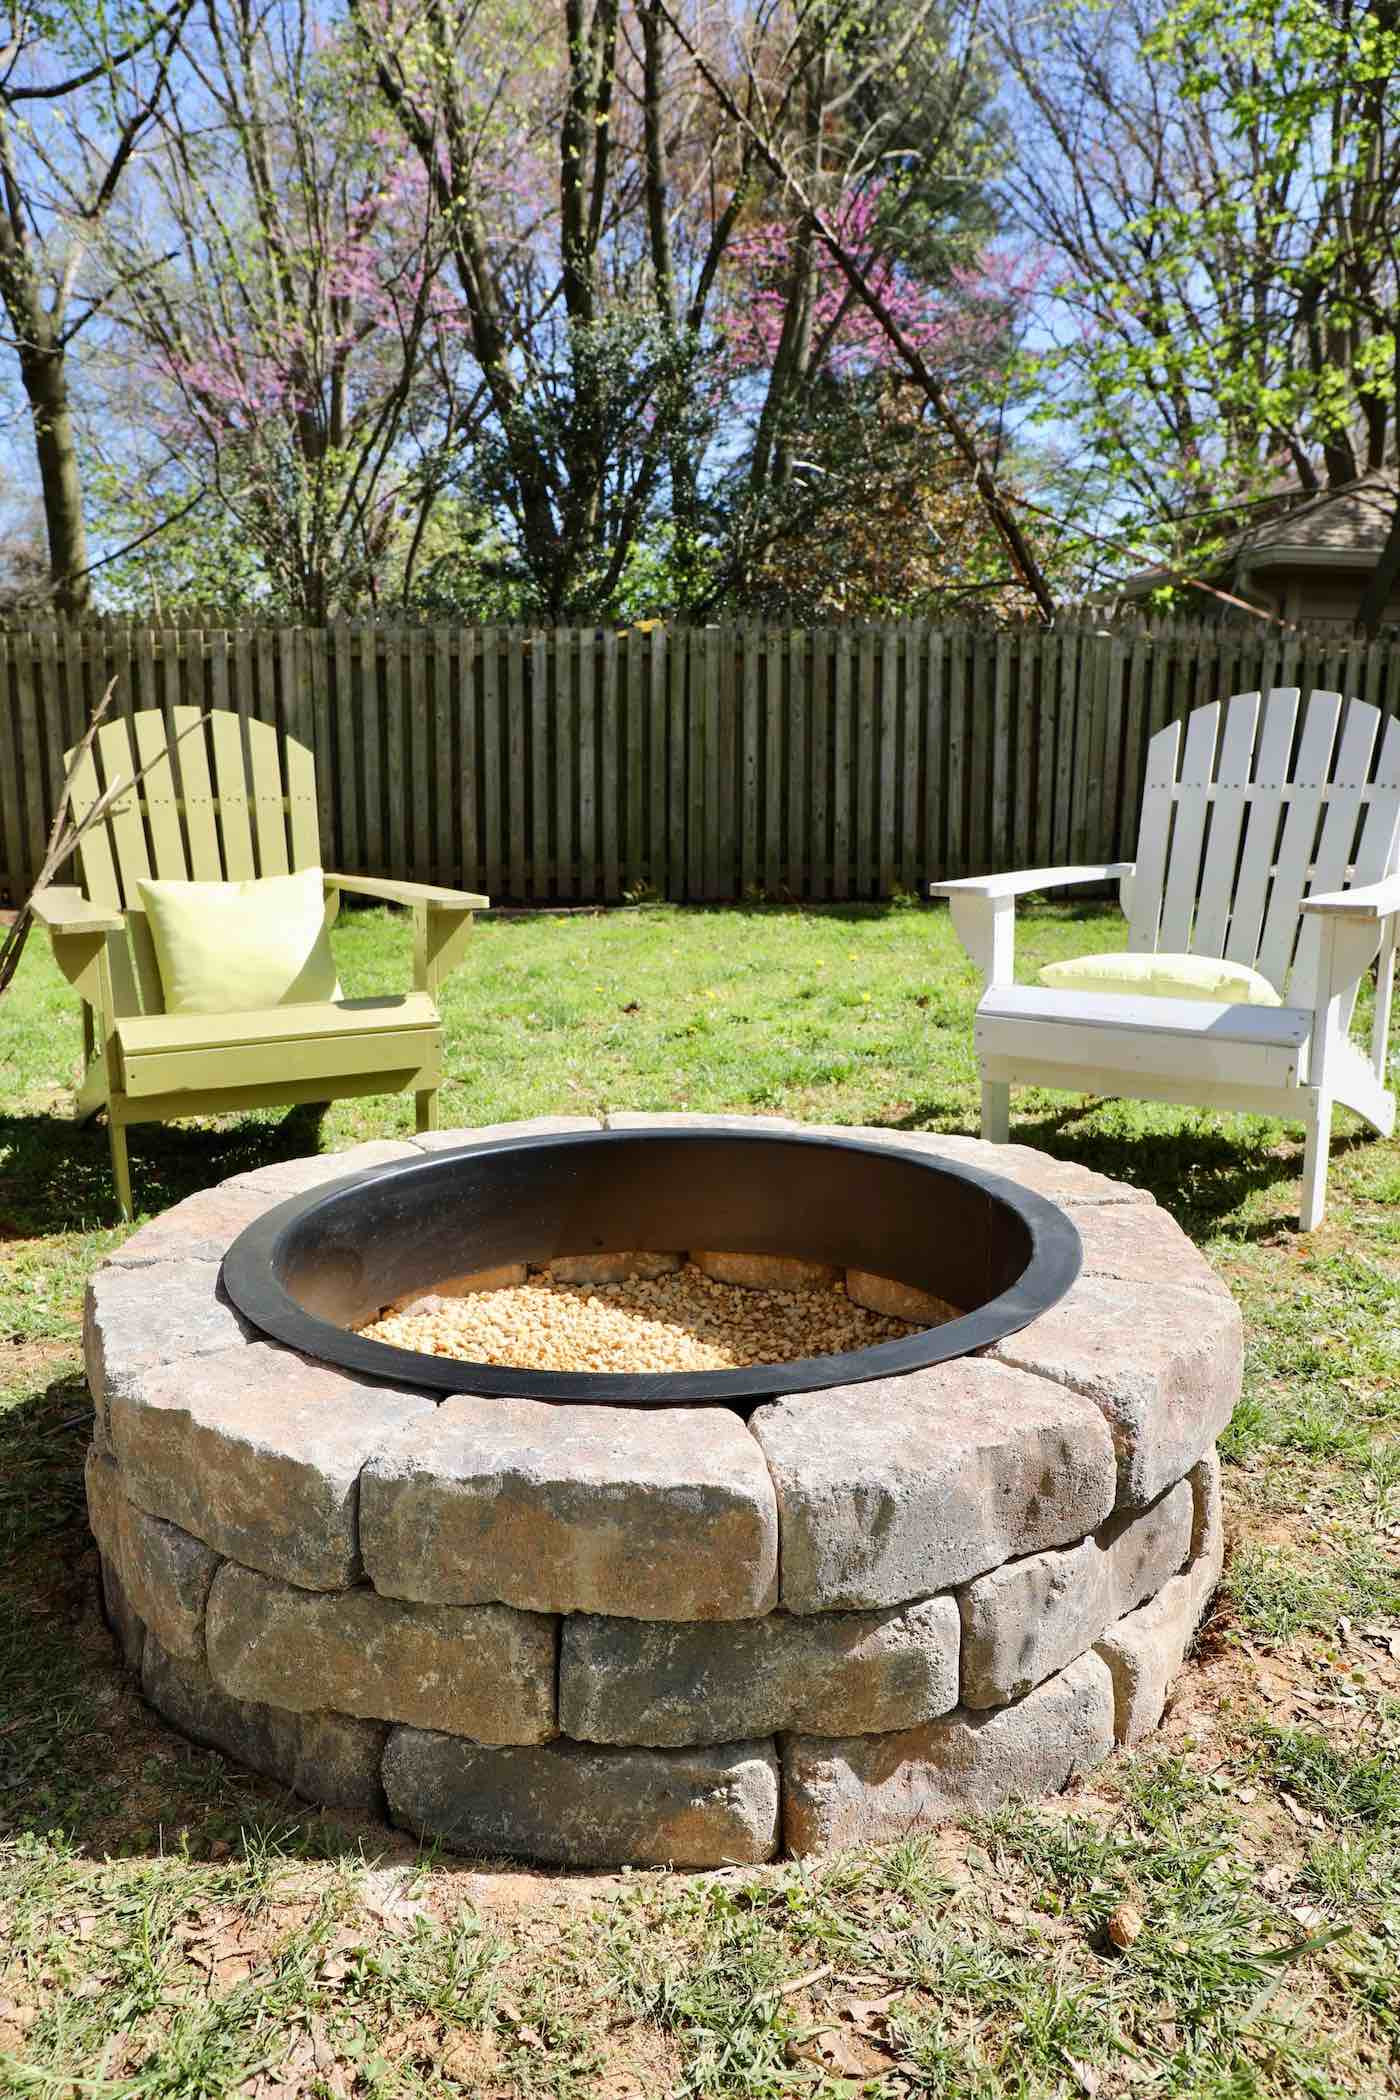 Built In Firepit
 How to Build a Fire Pit in Your Backyard I Used a Fire